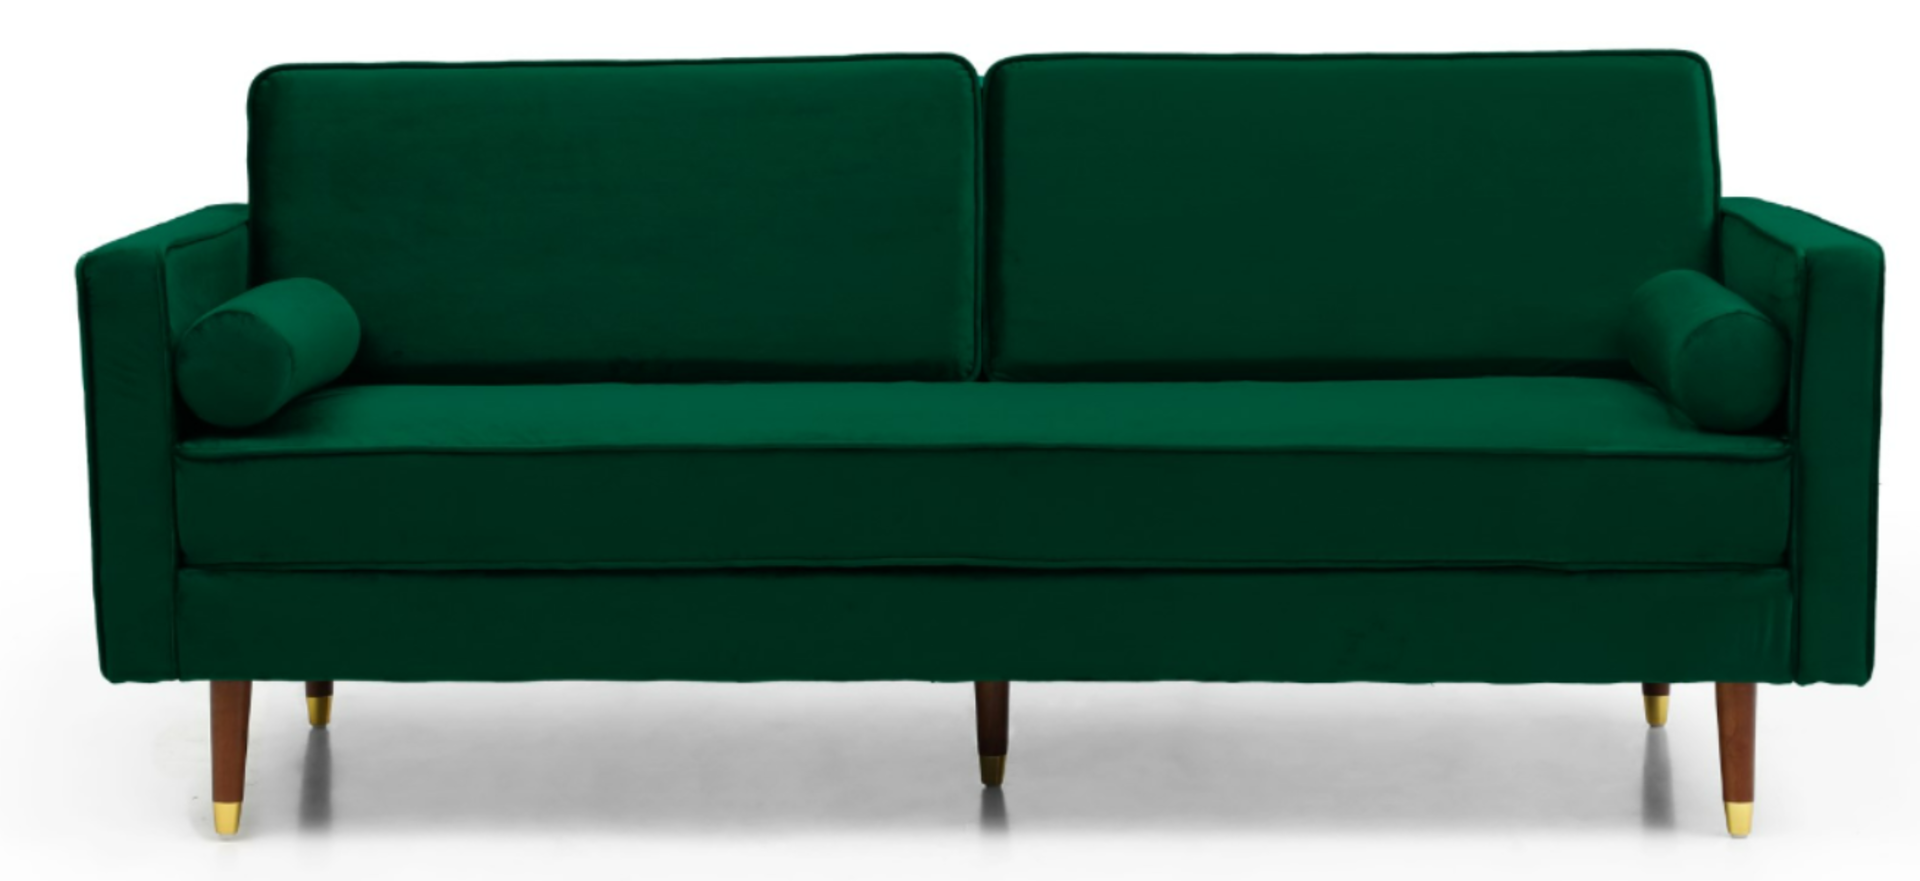 New & Packaged Slender Green 3 Seater Sofa. RRP £688. (CNT) People associate sofas with rest and